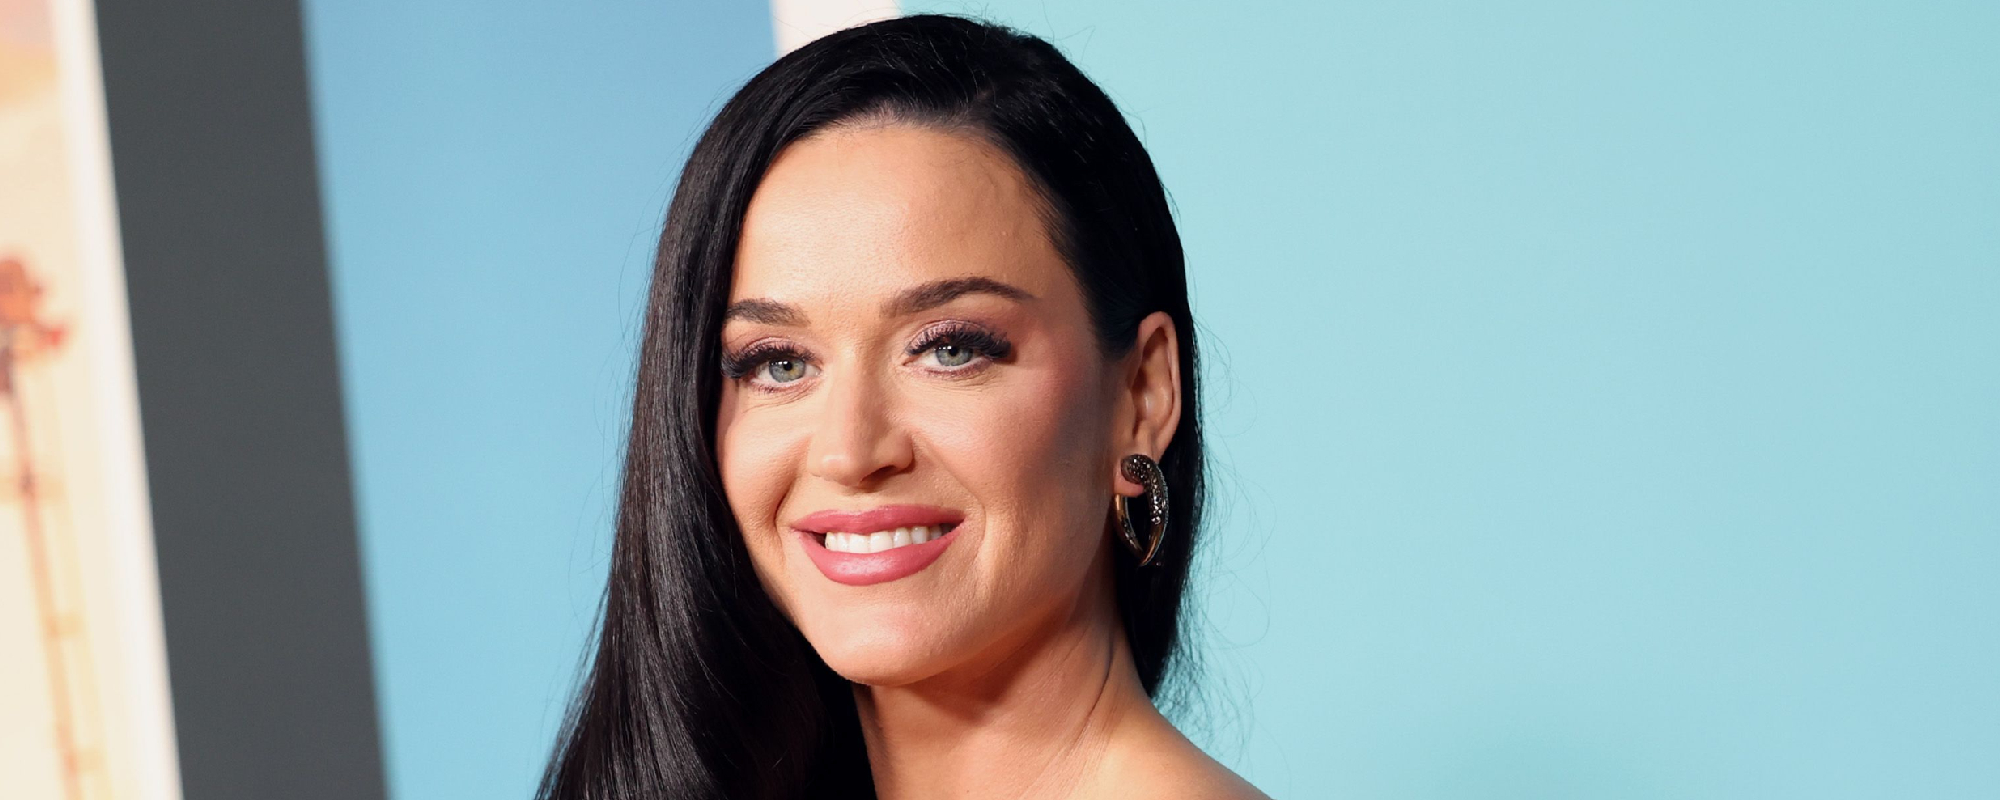 ‘American Idol’ Star Katy Perry Pushes Back Against One of the Biggest Lies in the Music Industry